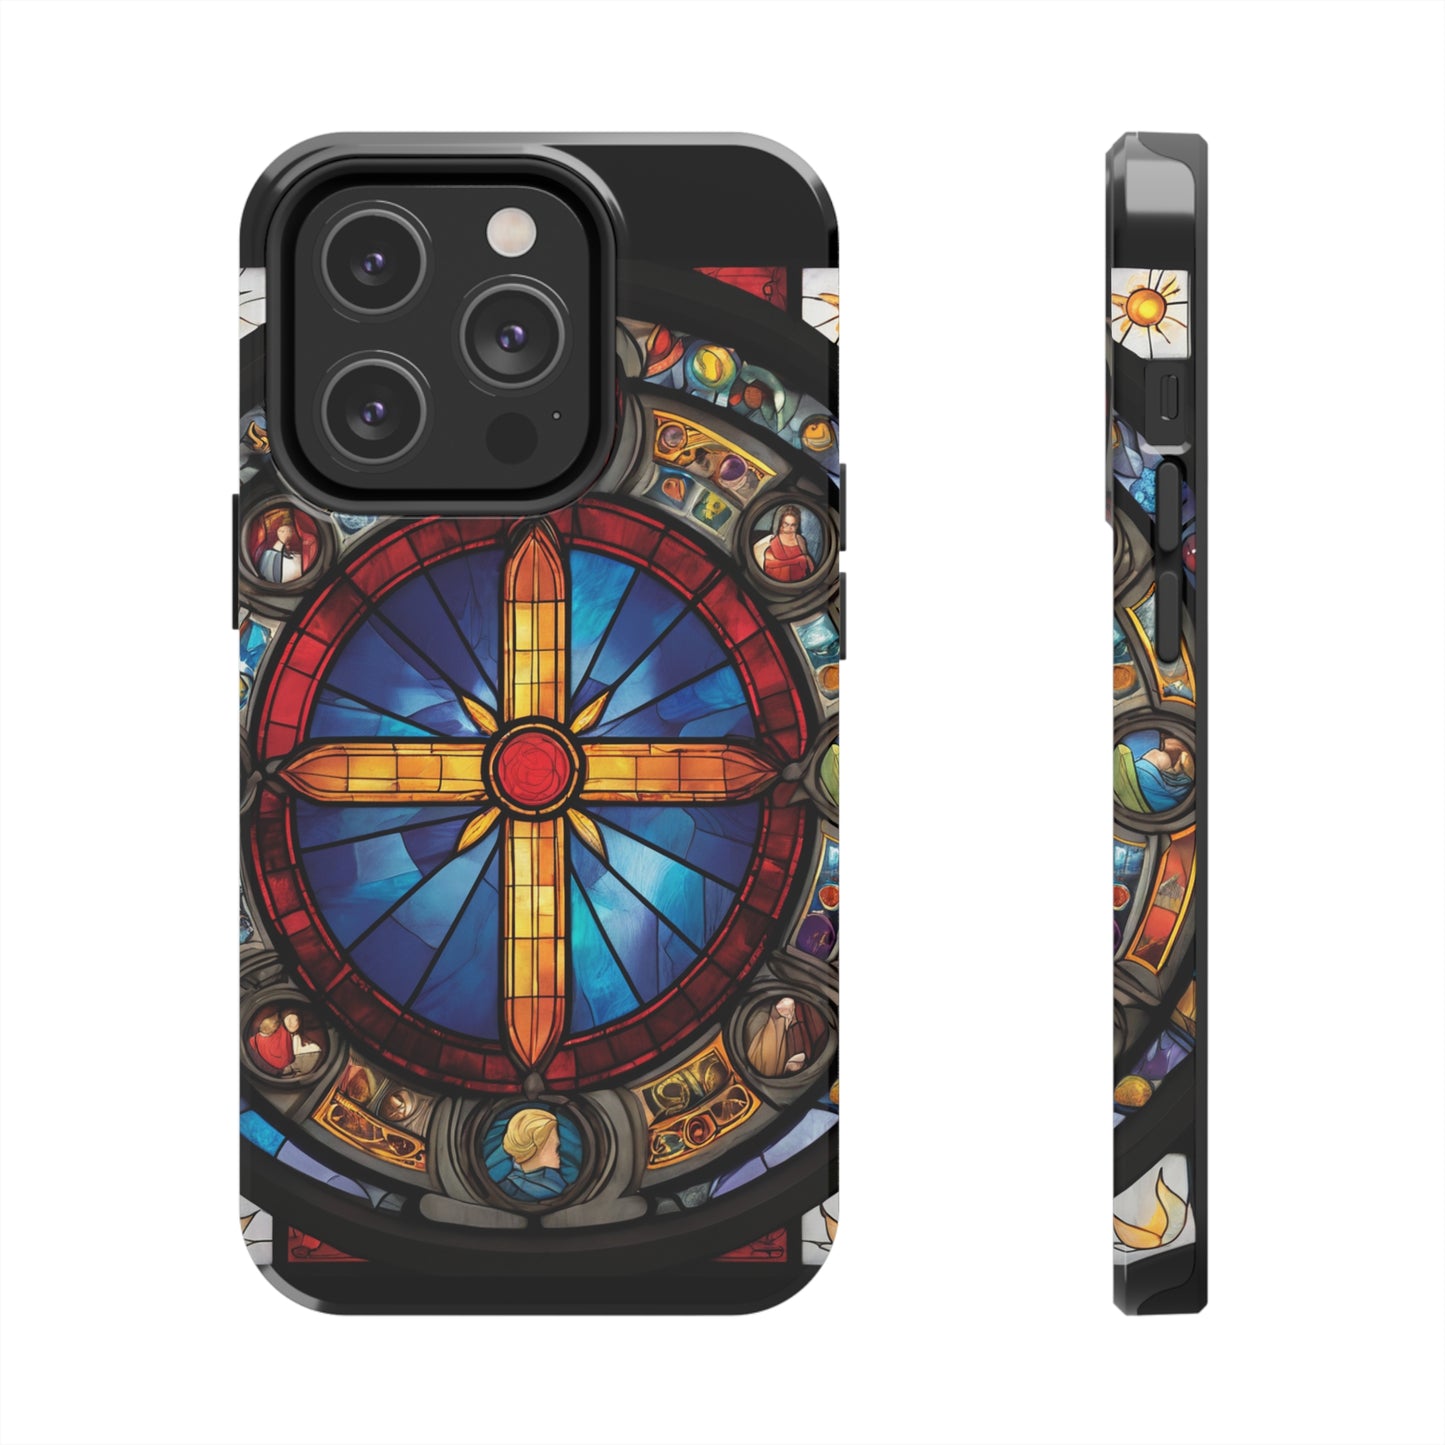 phone case religious iphone samsung Tough Phone Cases cross jesus stained glass